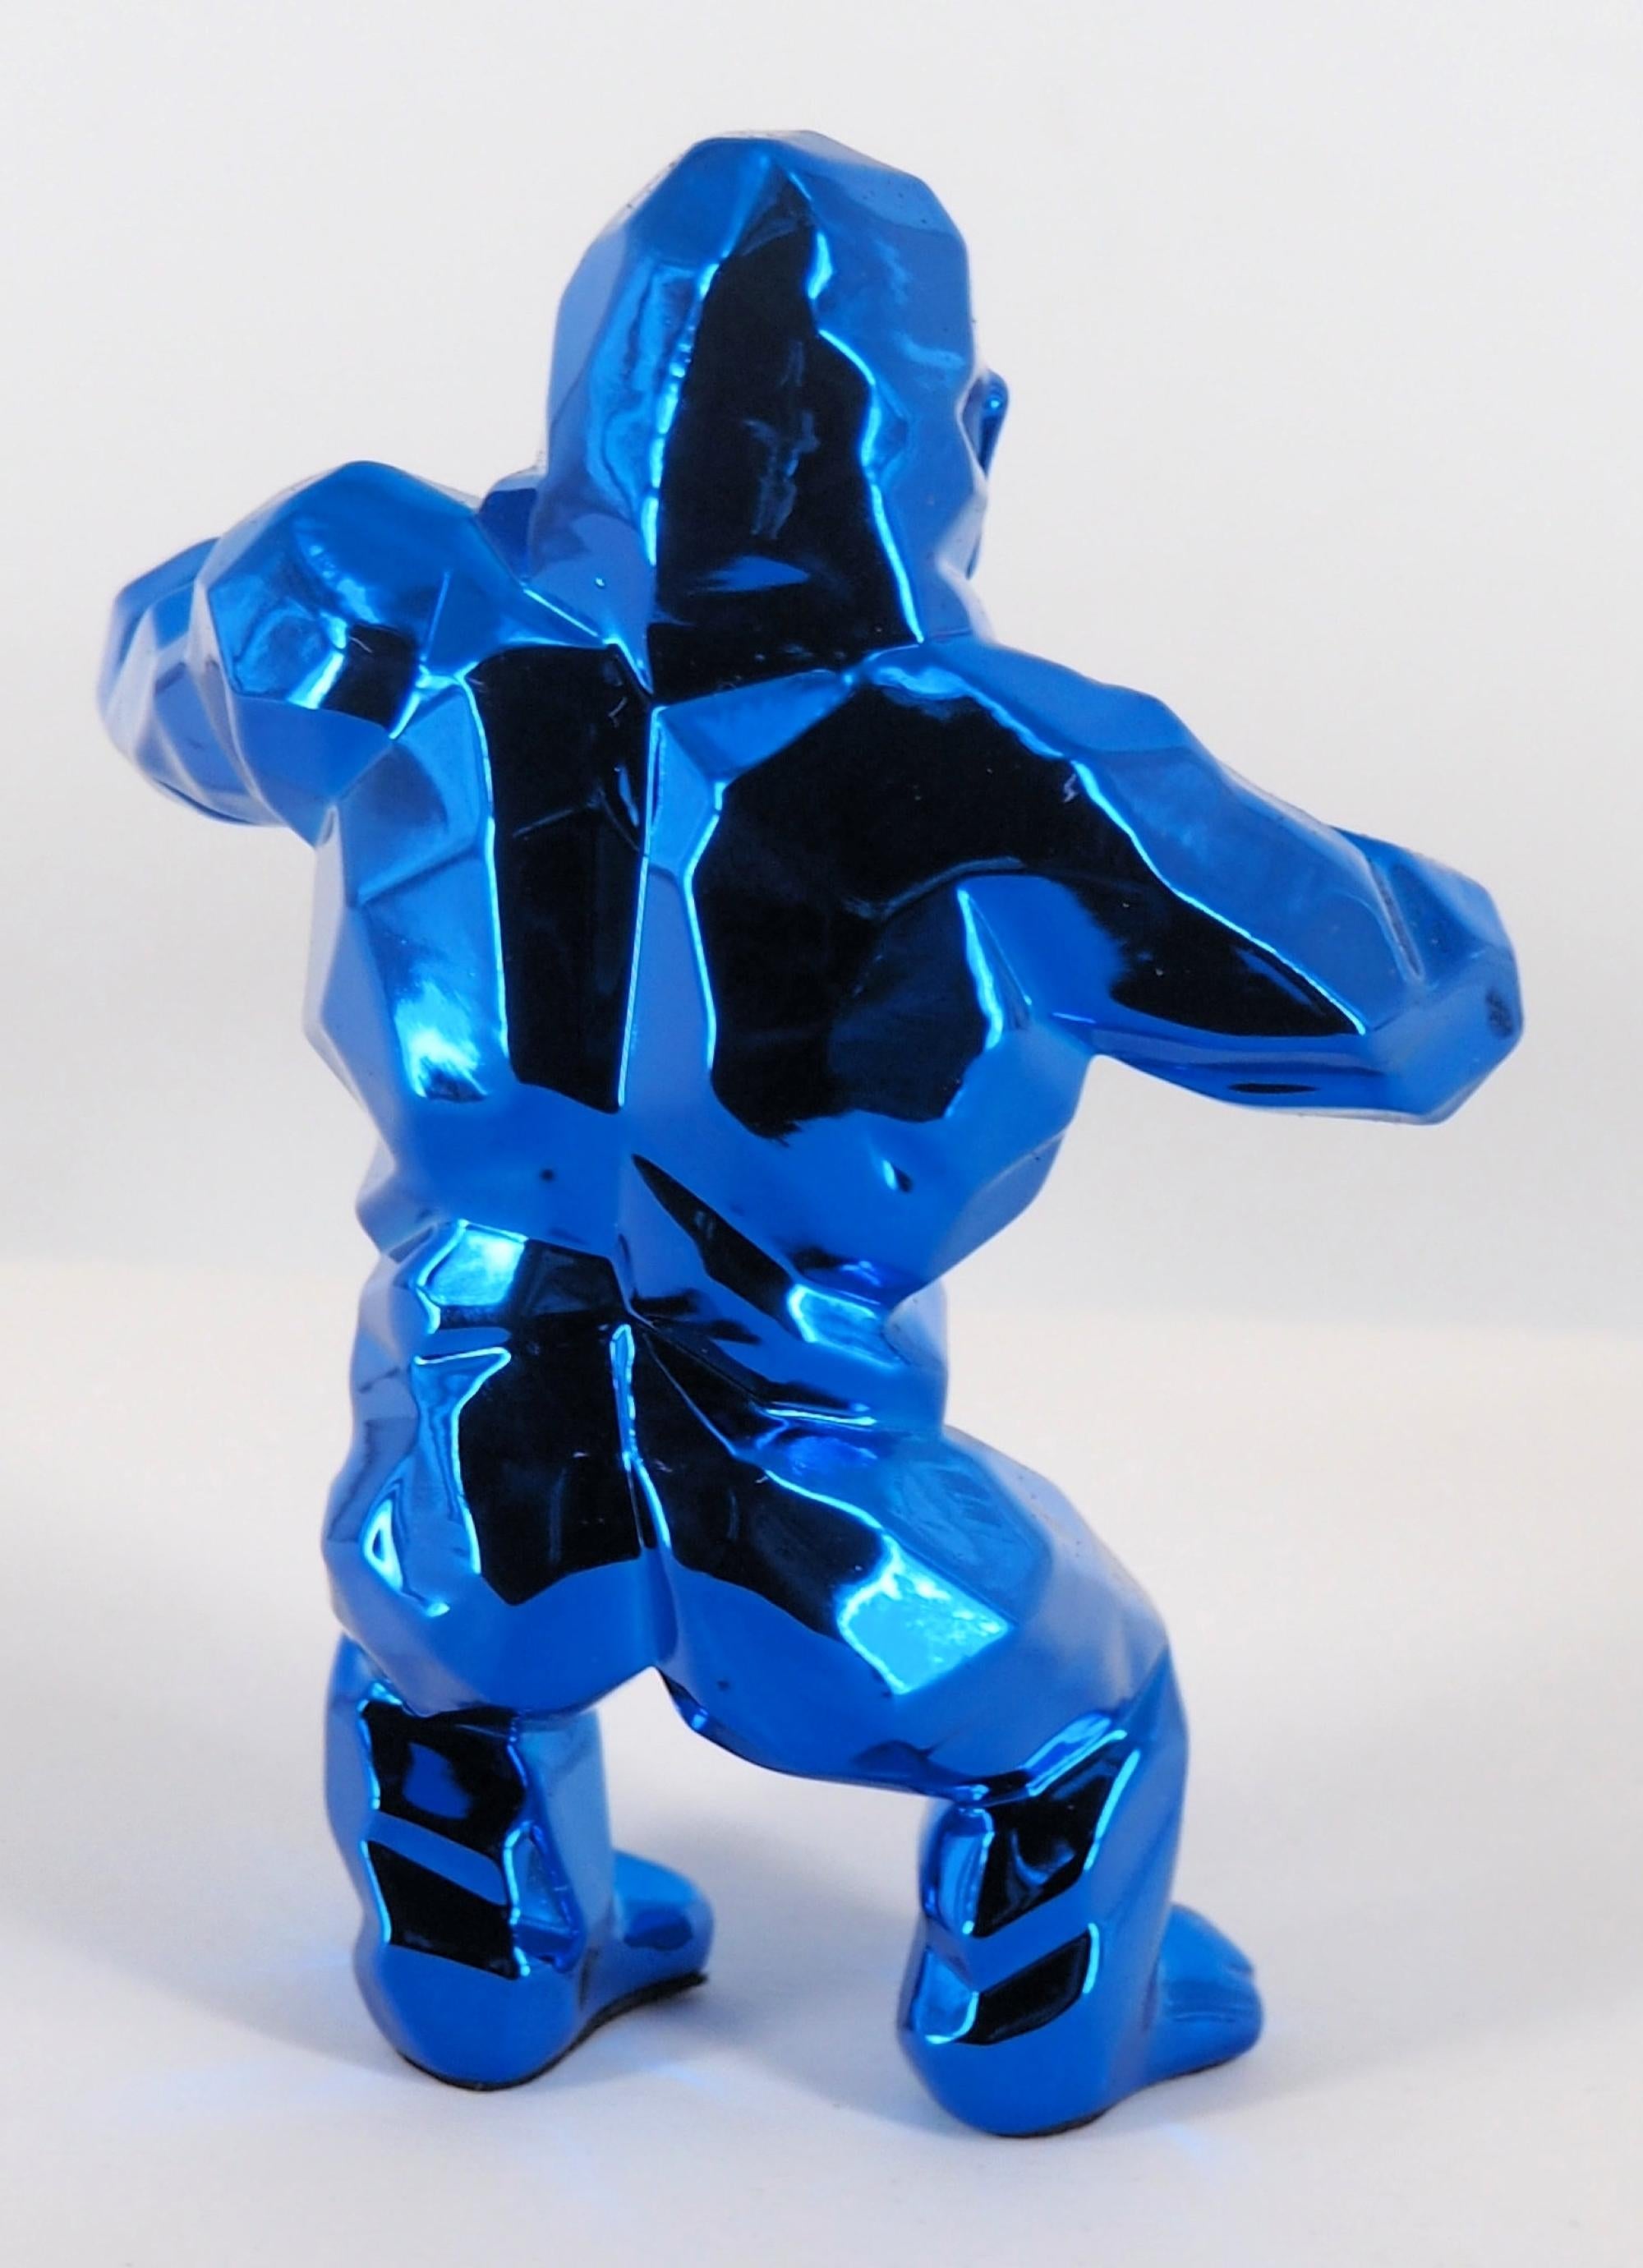 Richard ORLINSKI
Kong Spirit (Blue edition)

Sculpture in resin
Metallic Blue
About 13 x 10 cm (c. 5.1 x 3.9 in)
Presented in original box with certificate

Excellent condition